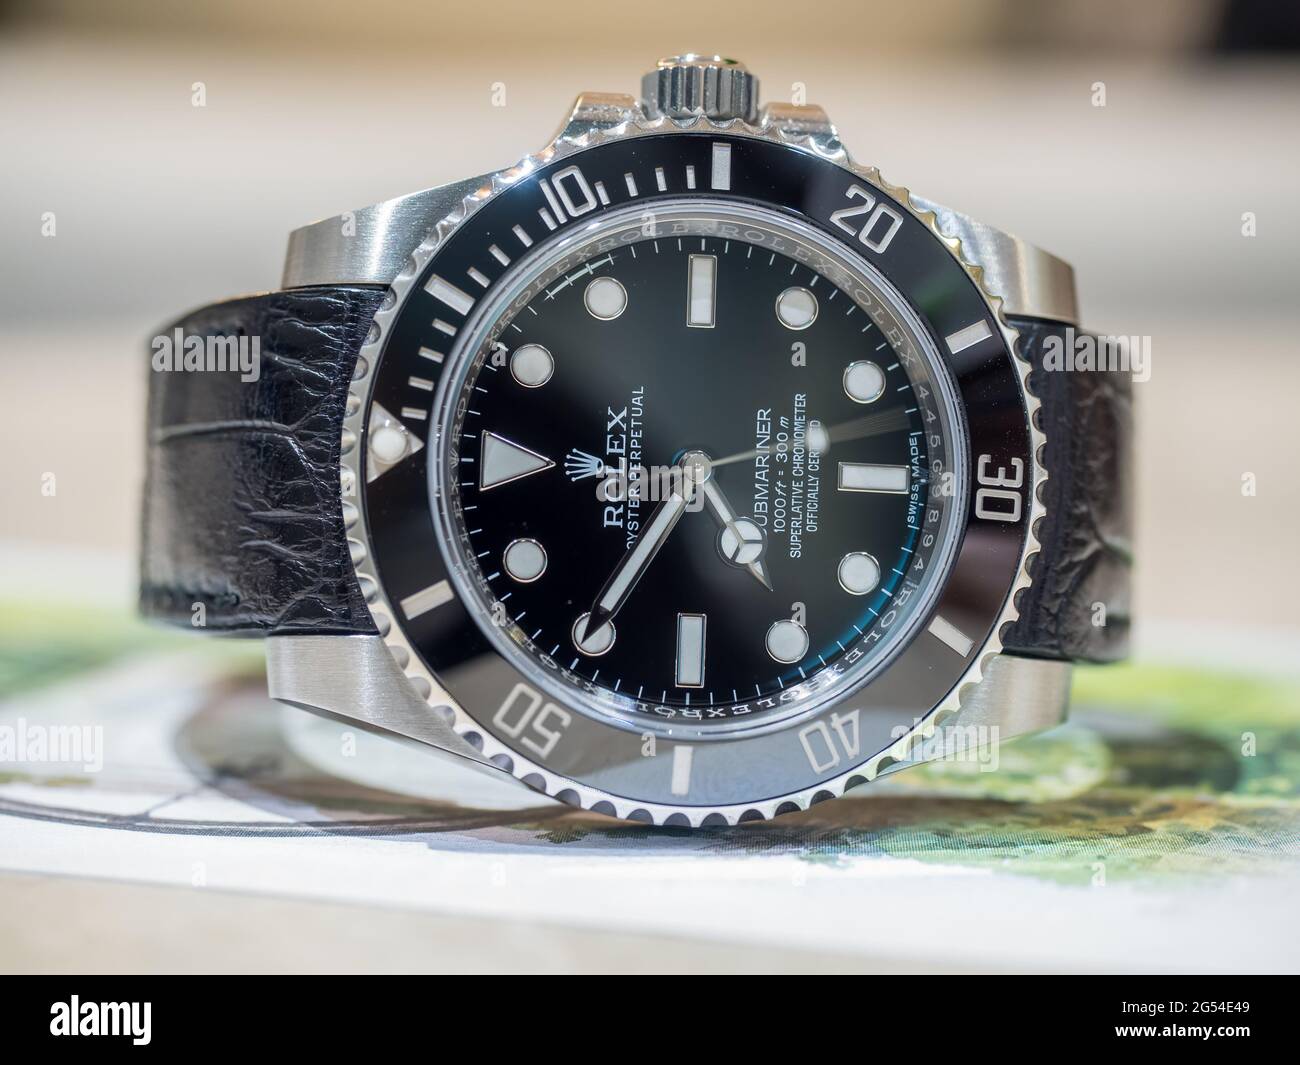 Page 7 - Luxury Brand Rolex High Resolution Stock Photography and Images -  Alamy